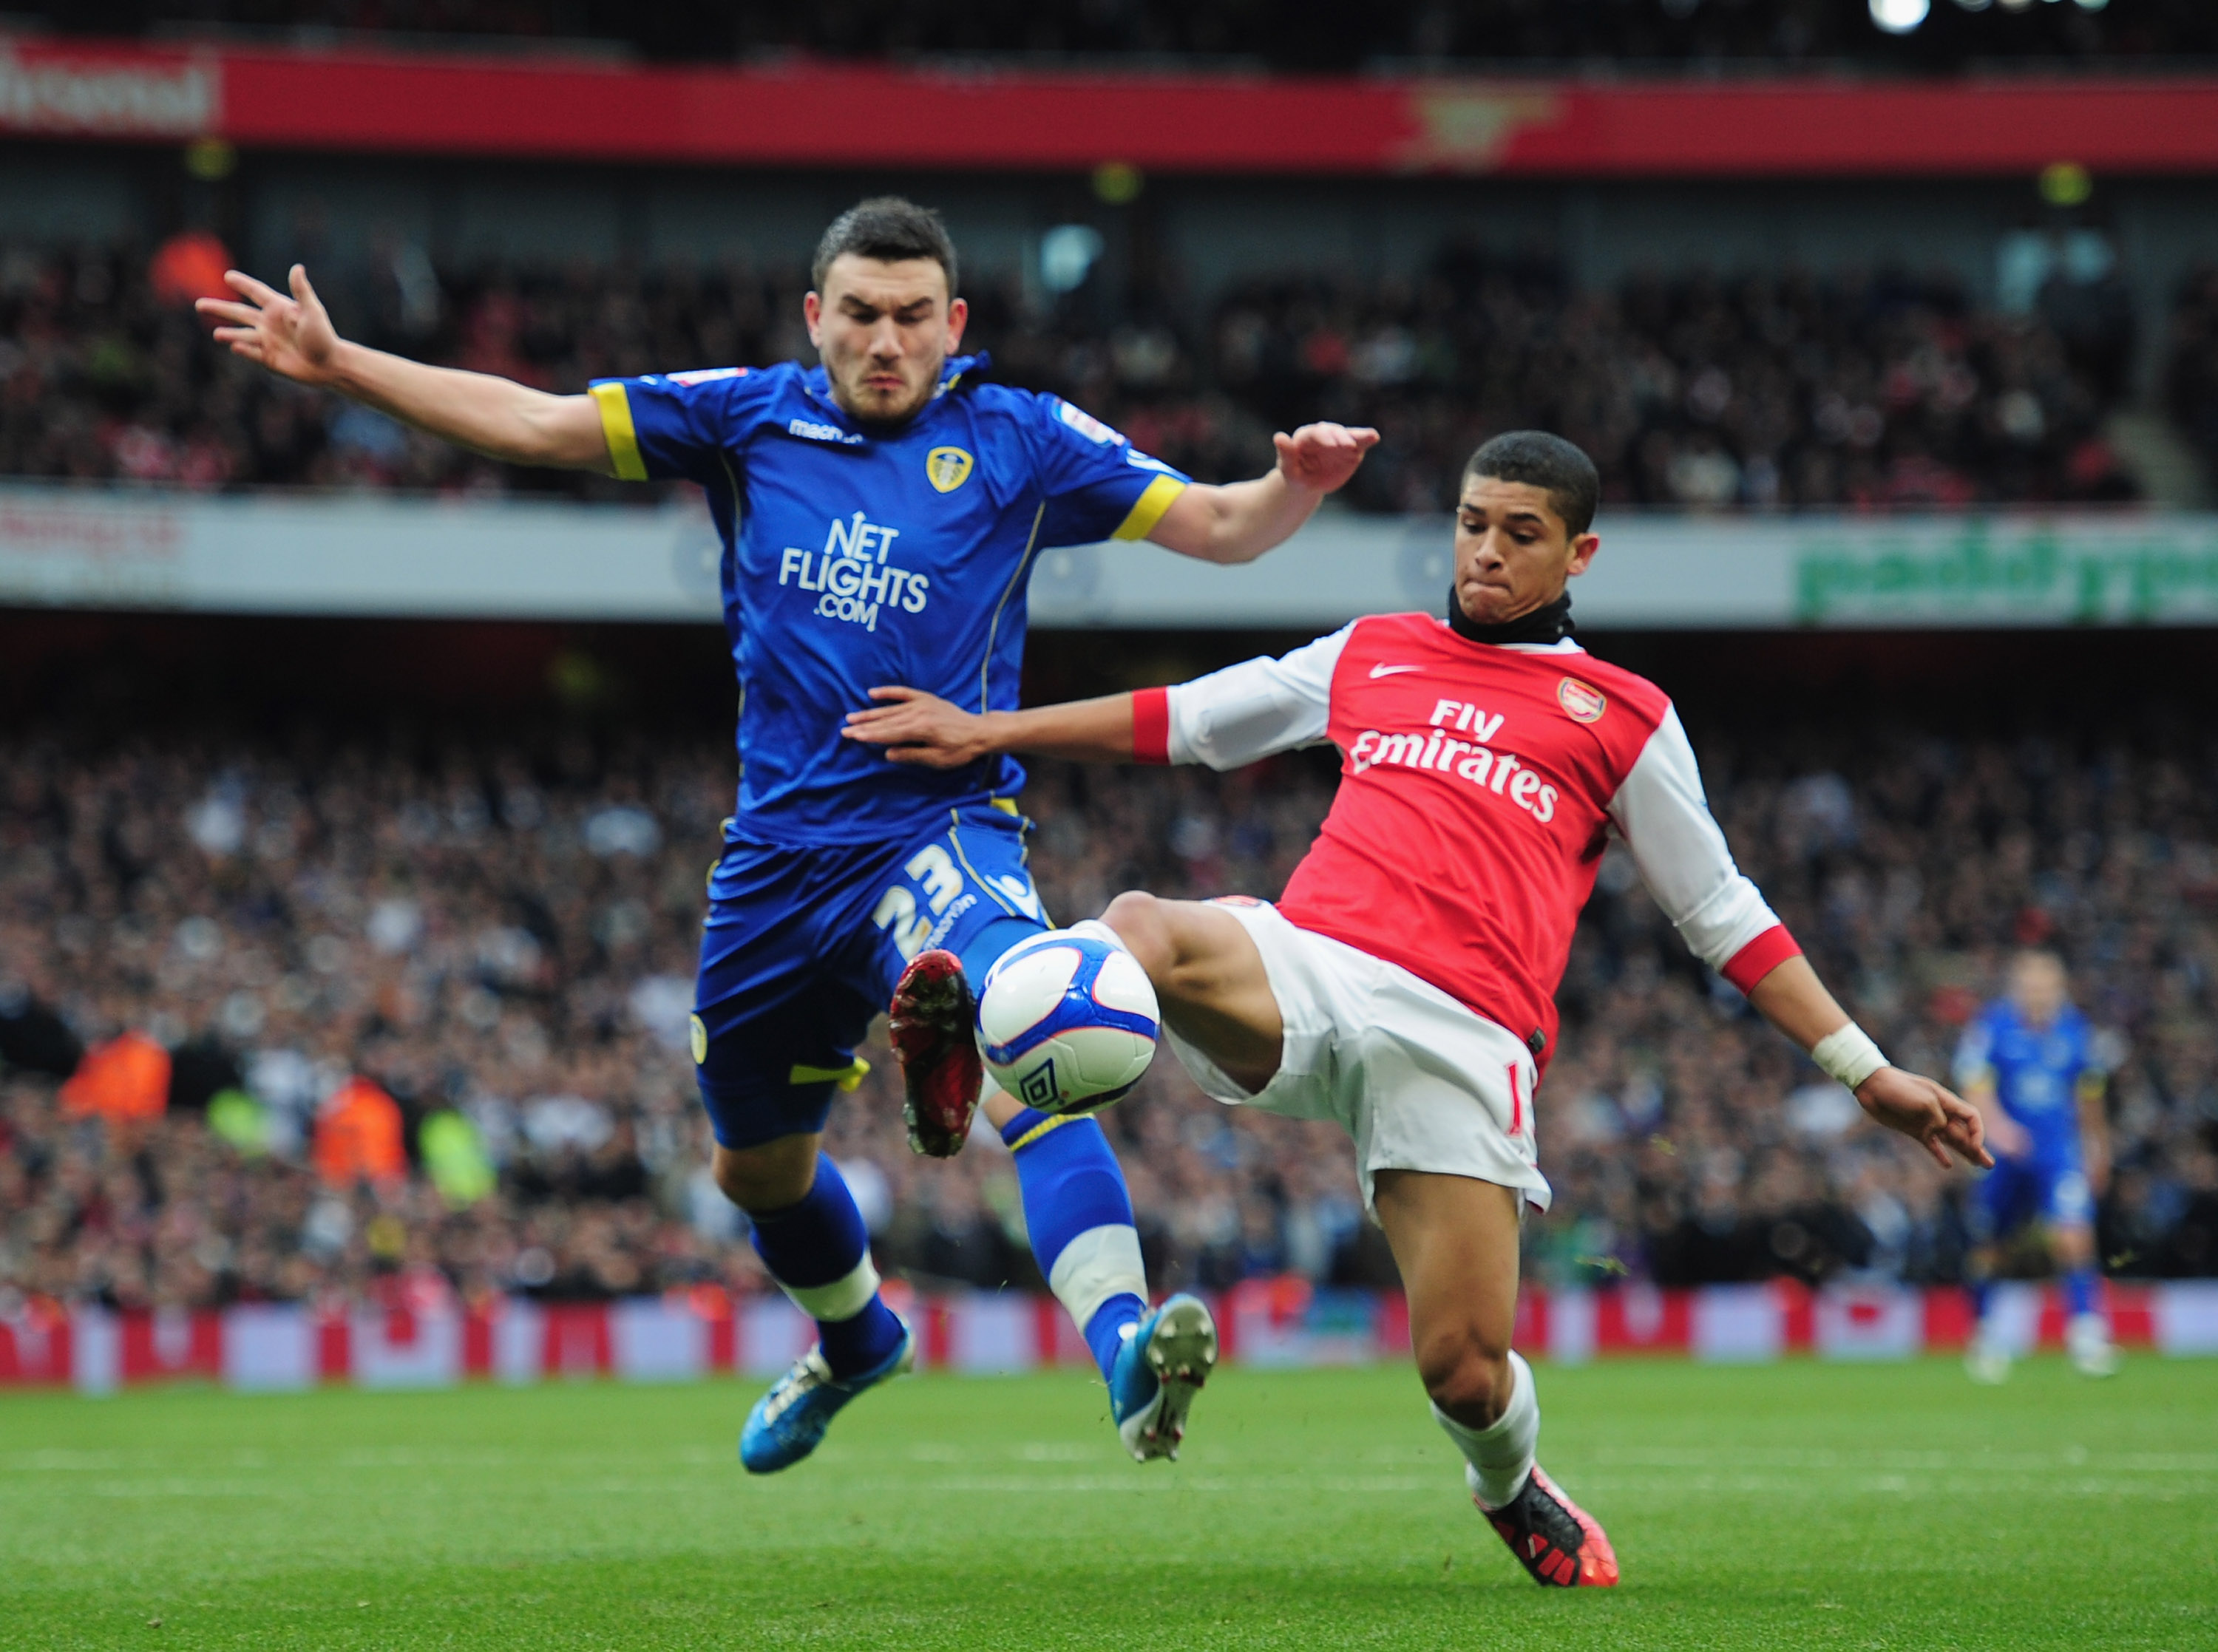 LONDON, ENGLAND - JANUARY 08:  Denilson of Arsenal holds off a challenge from Robert Snodgrass of Leeds United during the FA Cup sponsored by E.ON 3rd Round match between Arsenal and Leeds United at Emirates Stadium on January 8, 2011 in London, England.